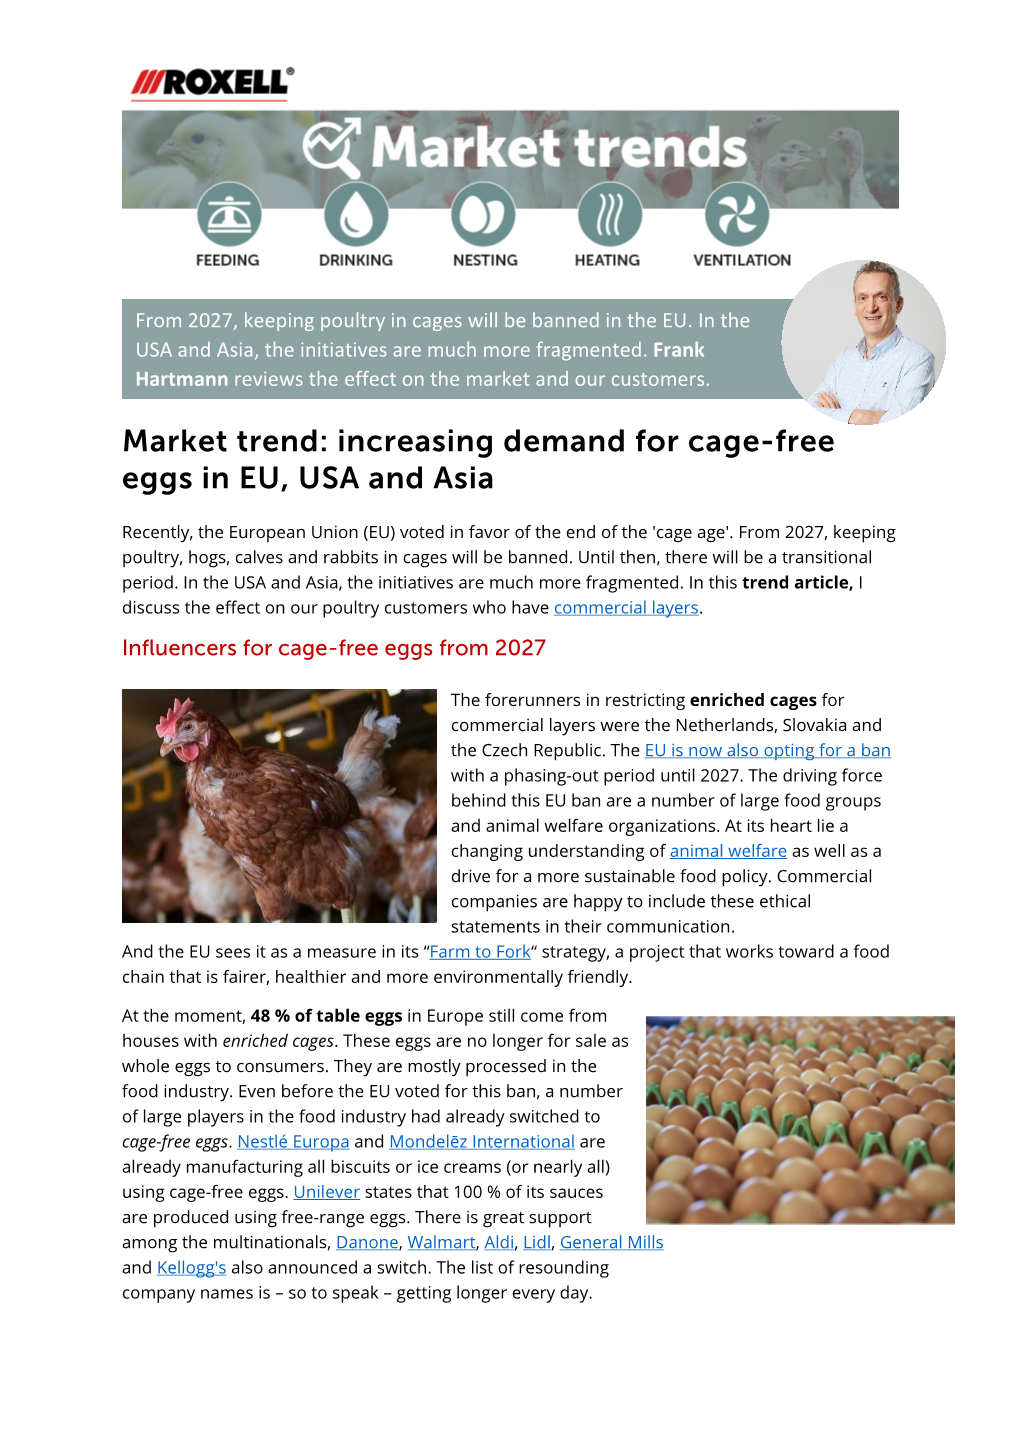 Market Trend: Increasing Demand for Cage-Free Eggs in EU, USA and Asia